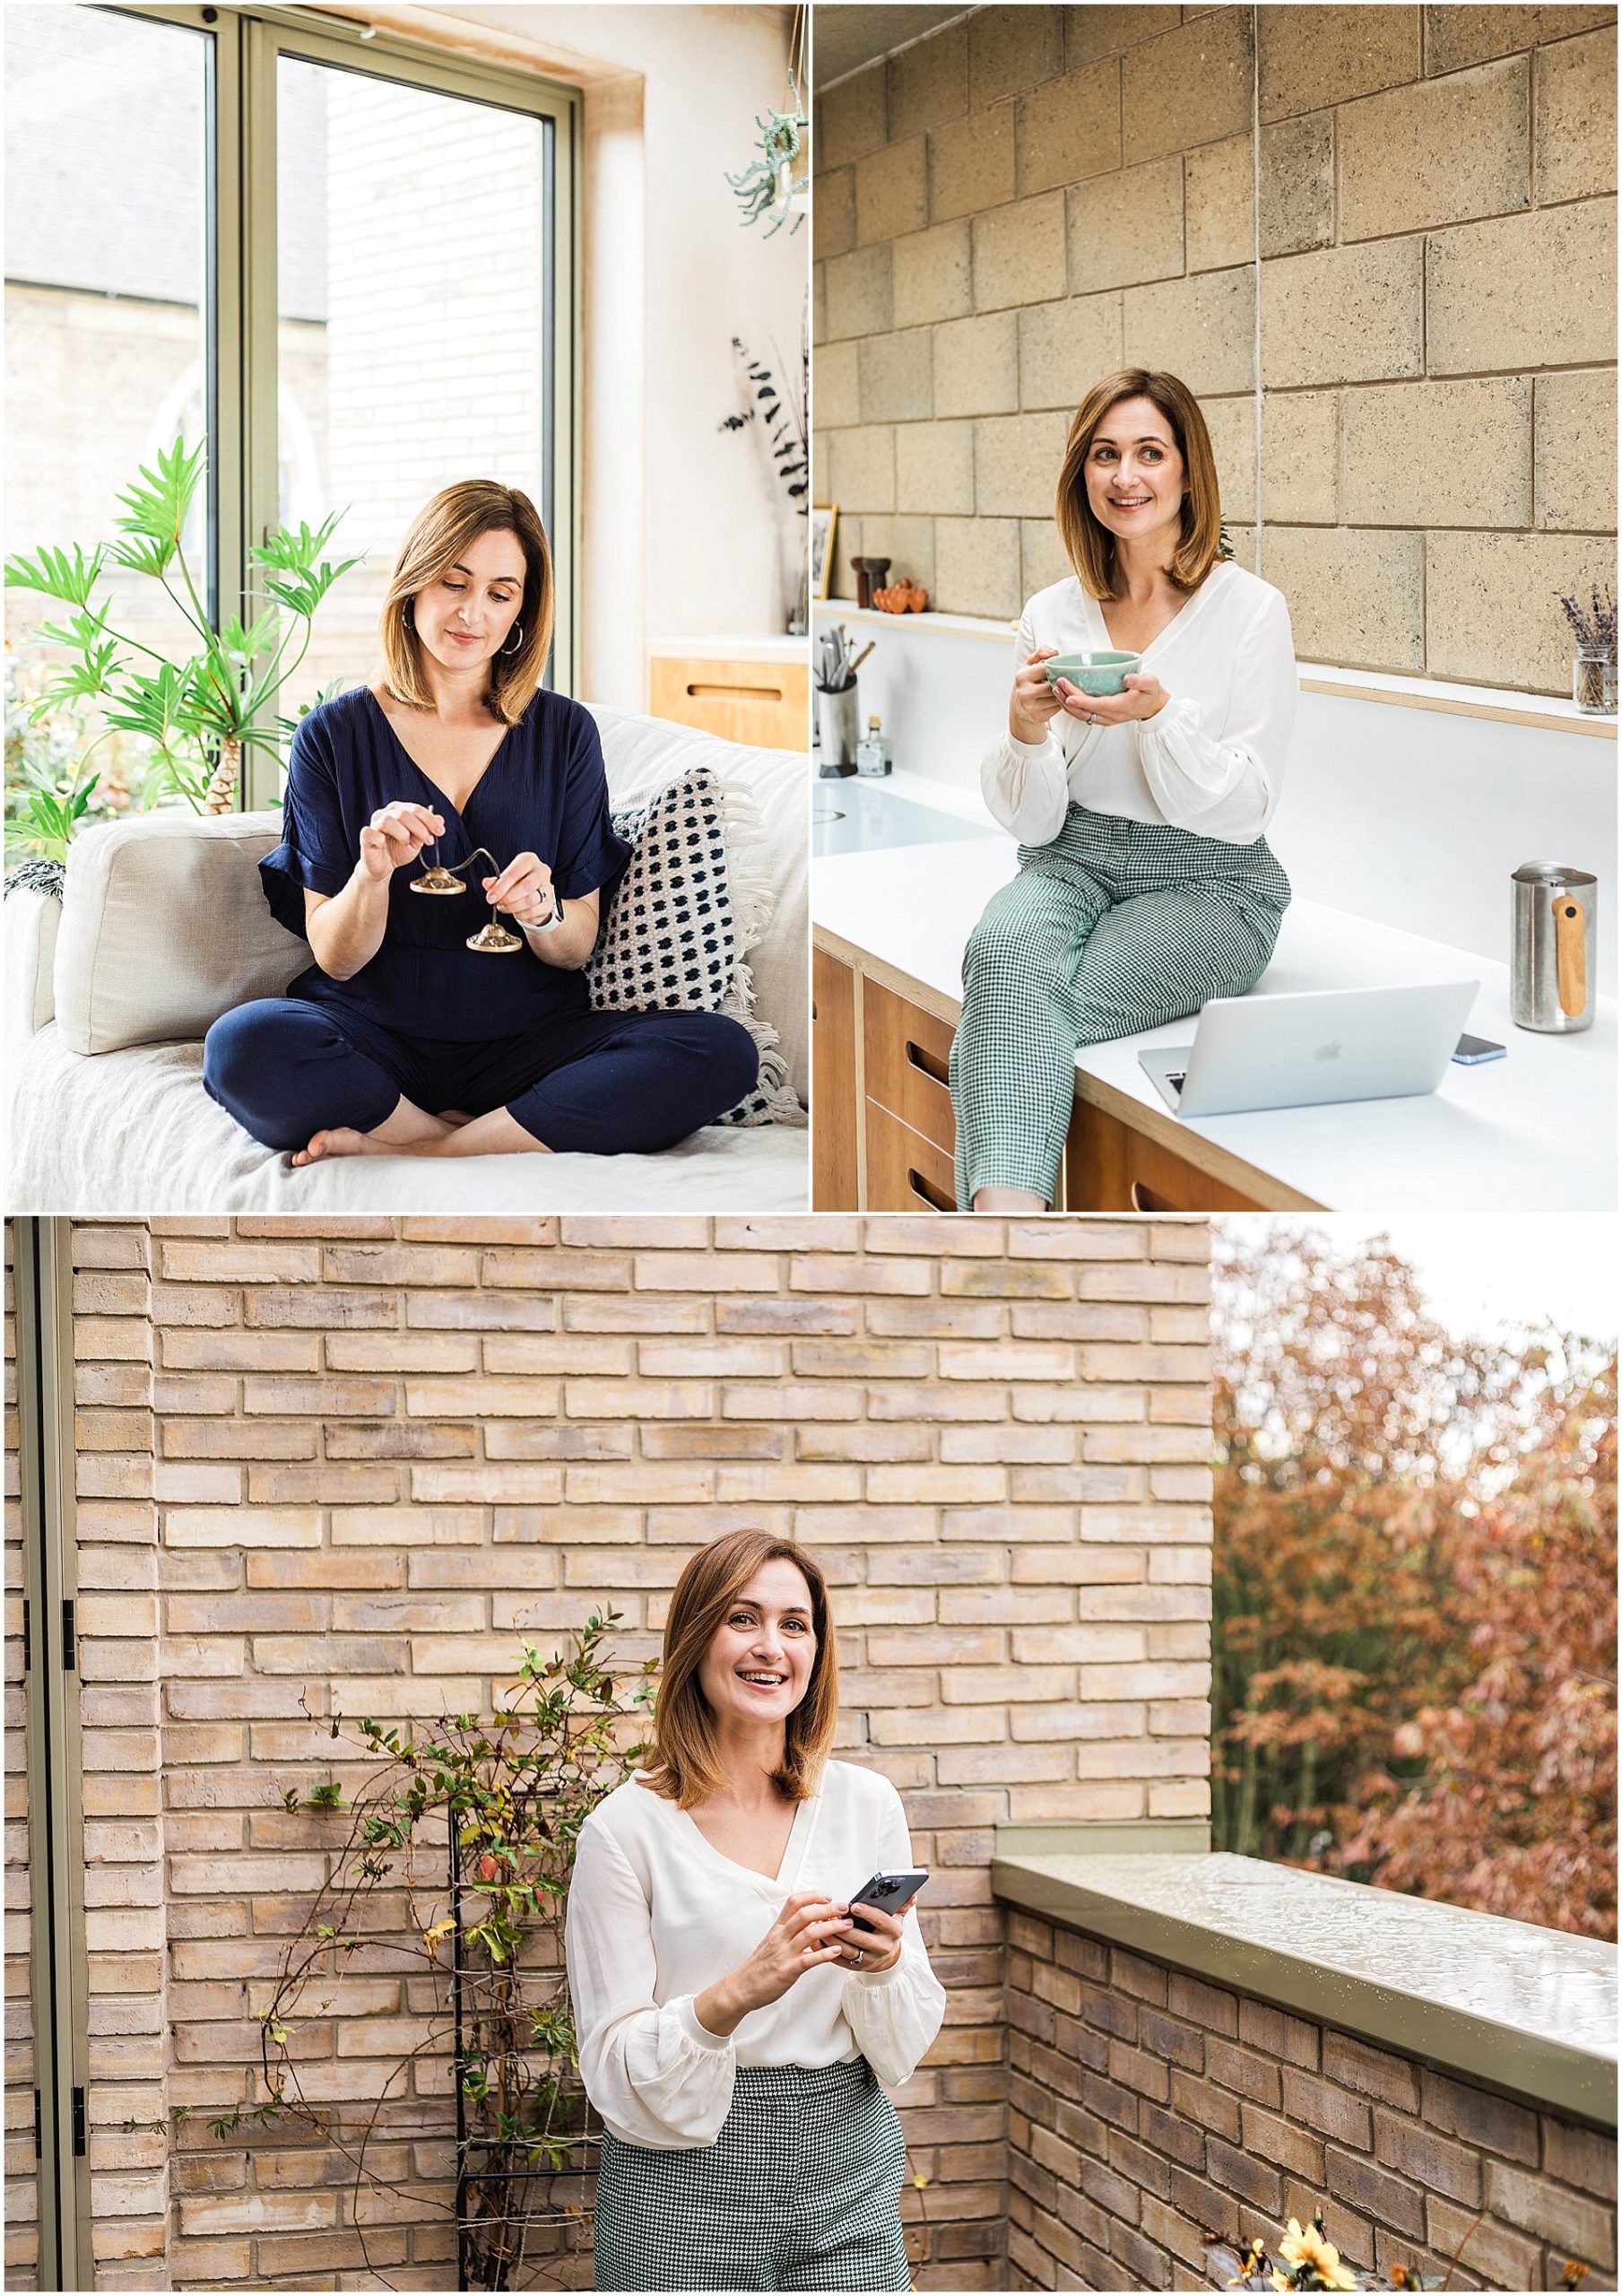 Brand shoot of sleep expert Holly in a shoot house in London. Images by London brand photographer AKP Branding Stories